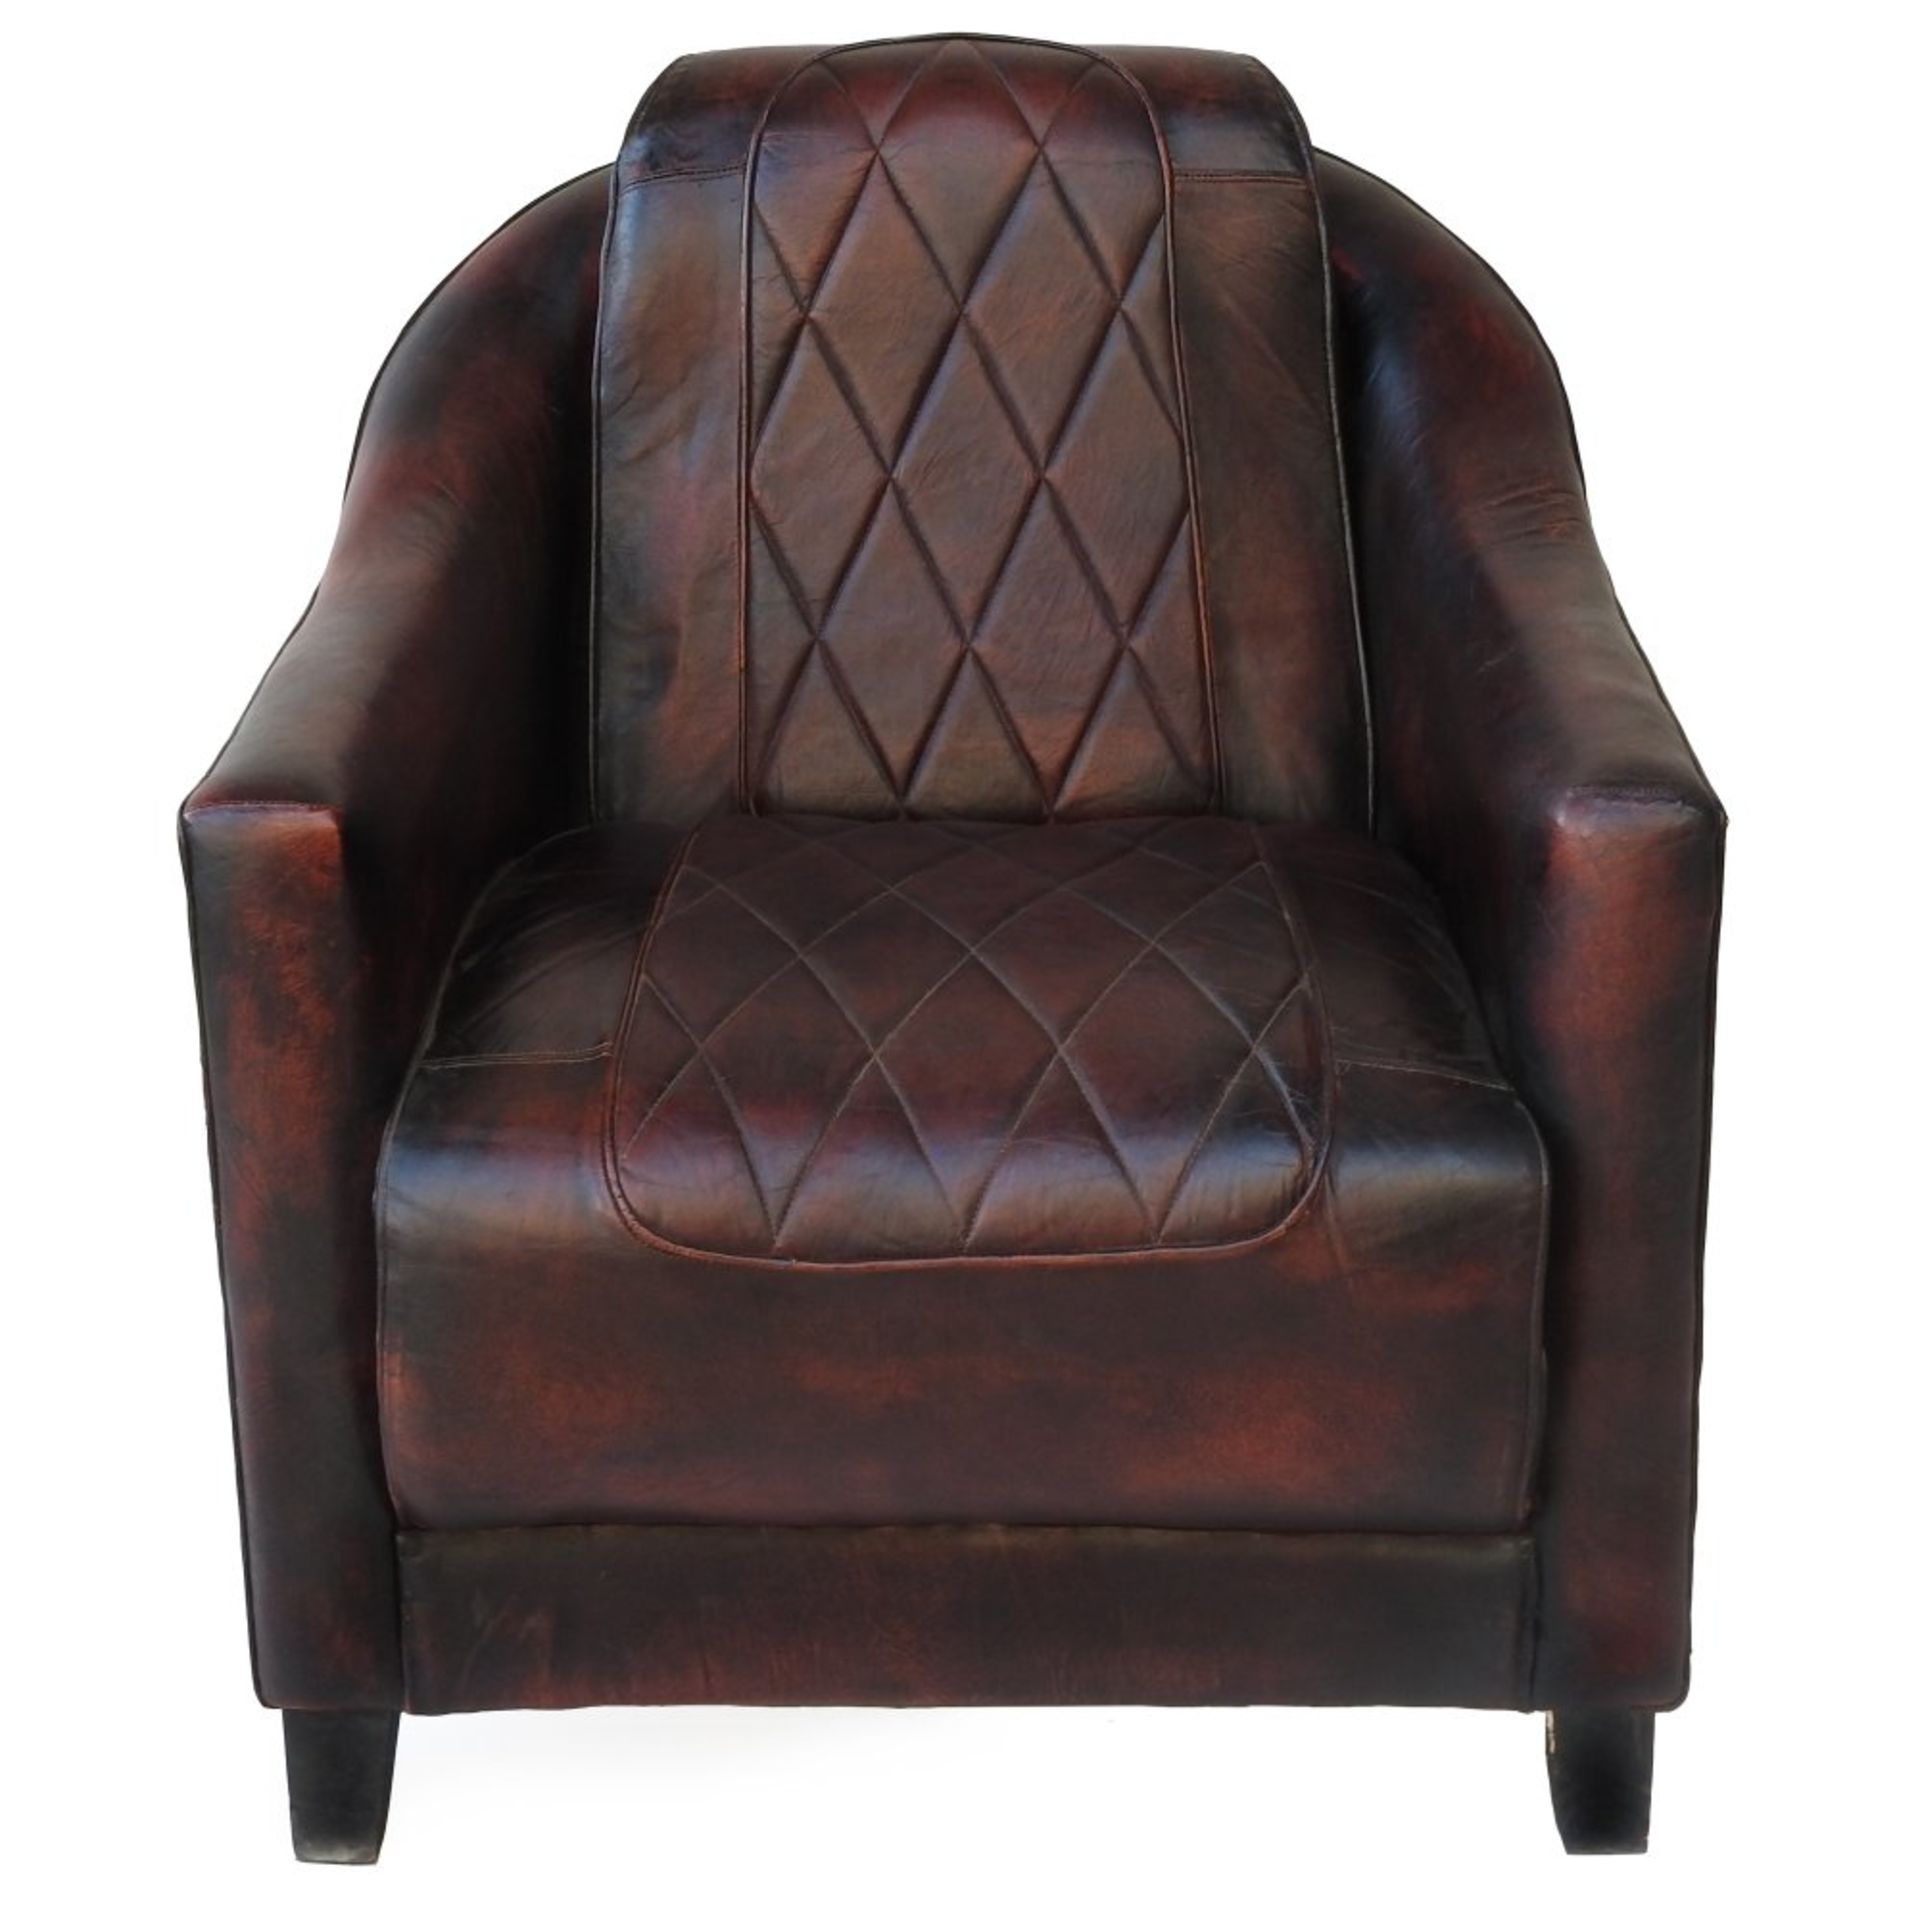 Union Jack leather armchair - Image 3 of 4